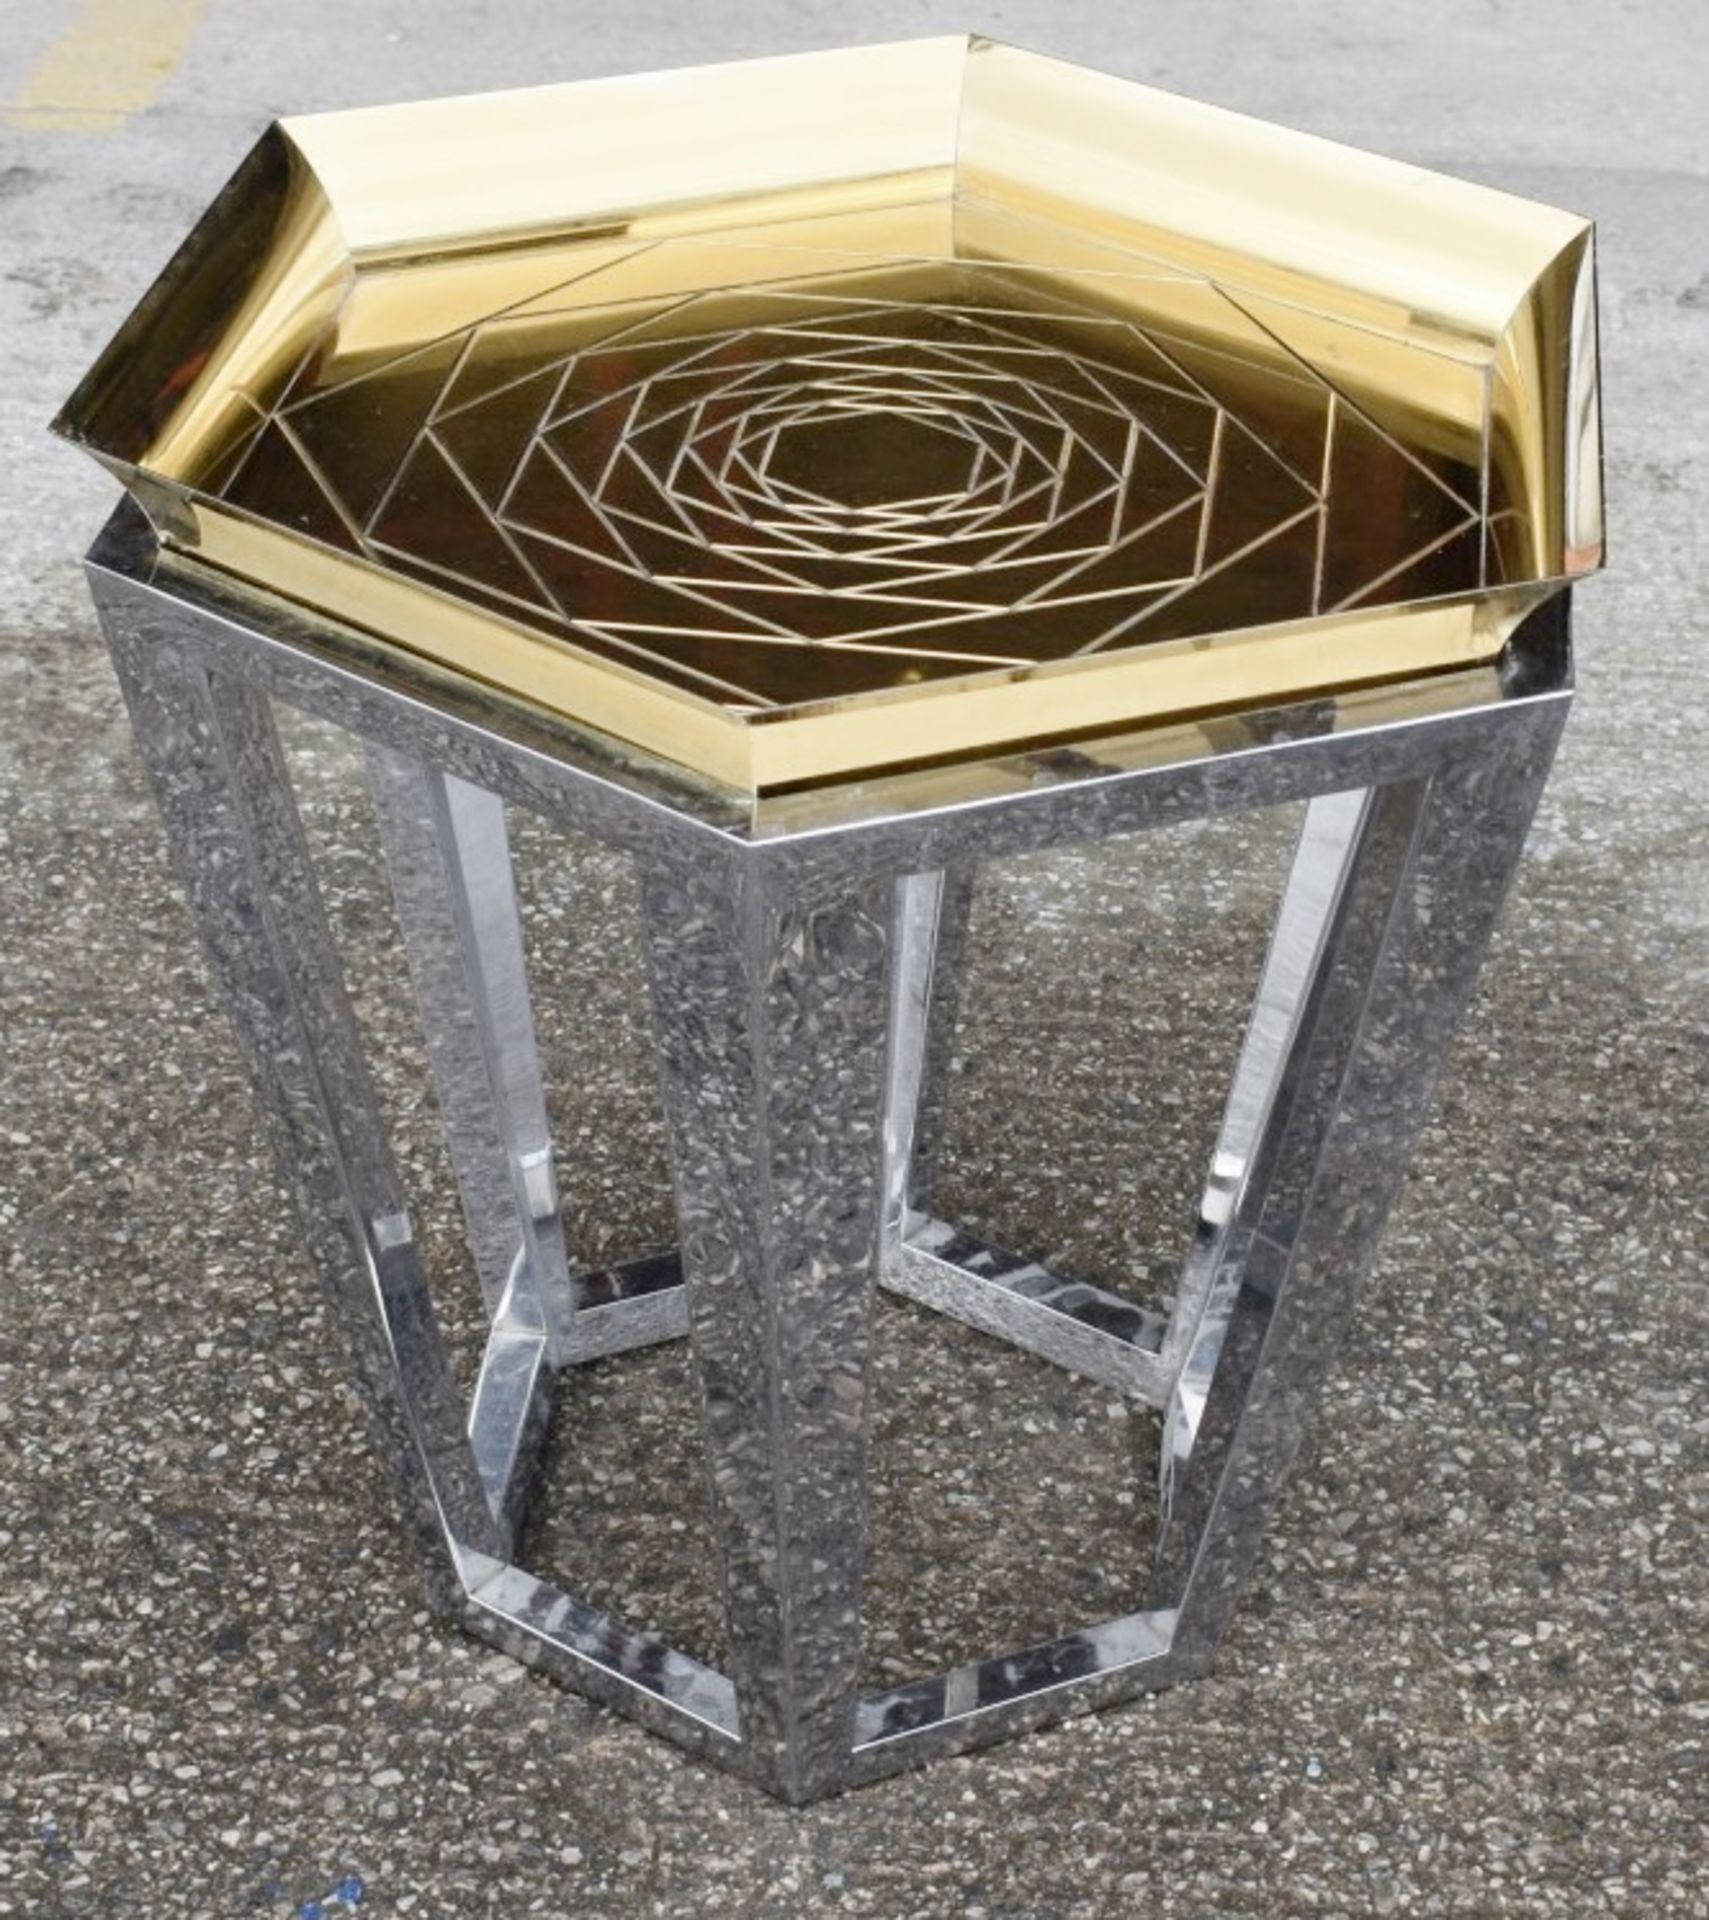 1 x Contemporary Designer Metal Table Featuring a Removable Tray Top with Geometric Rose Design, - Image 3 of 4